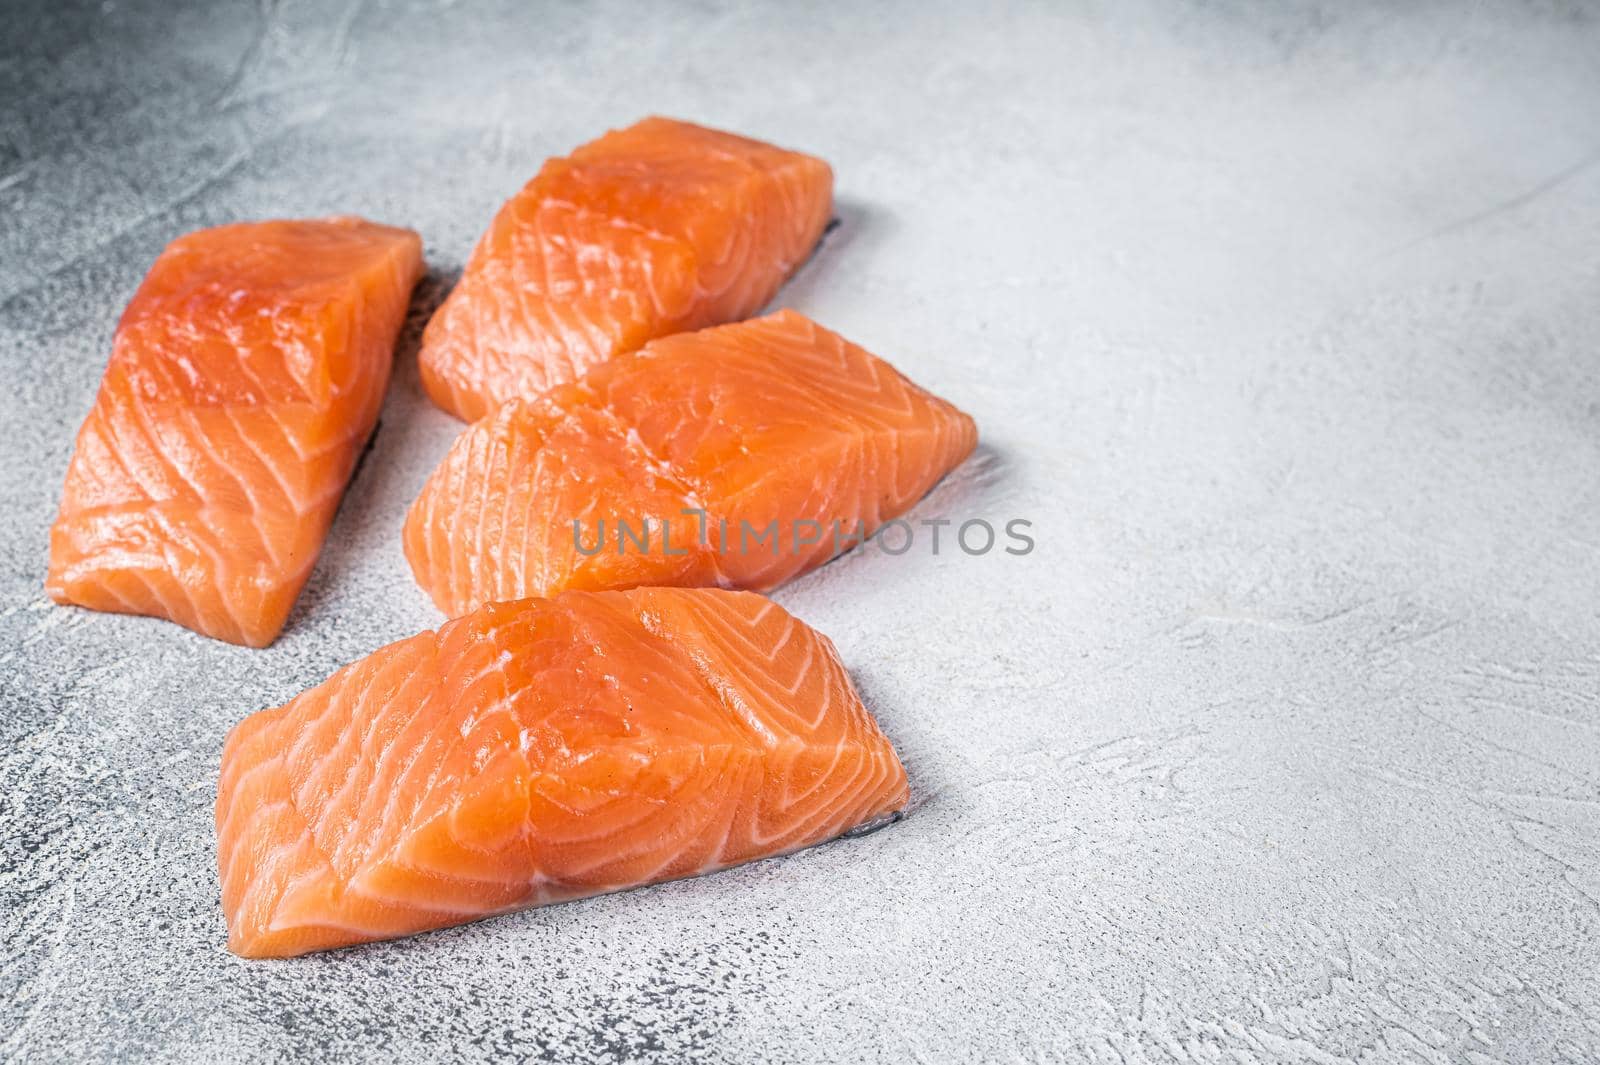 Raw salmon fillet steak on kitchen table. White background. Top view. Copy space.